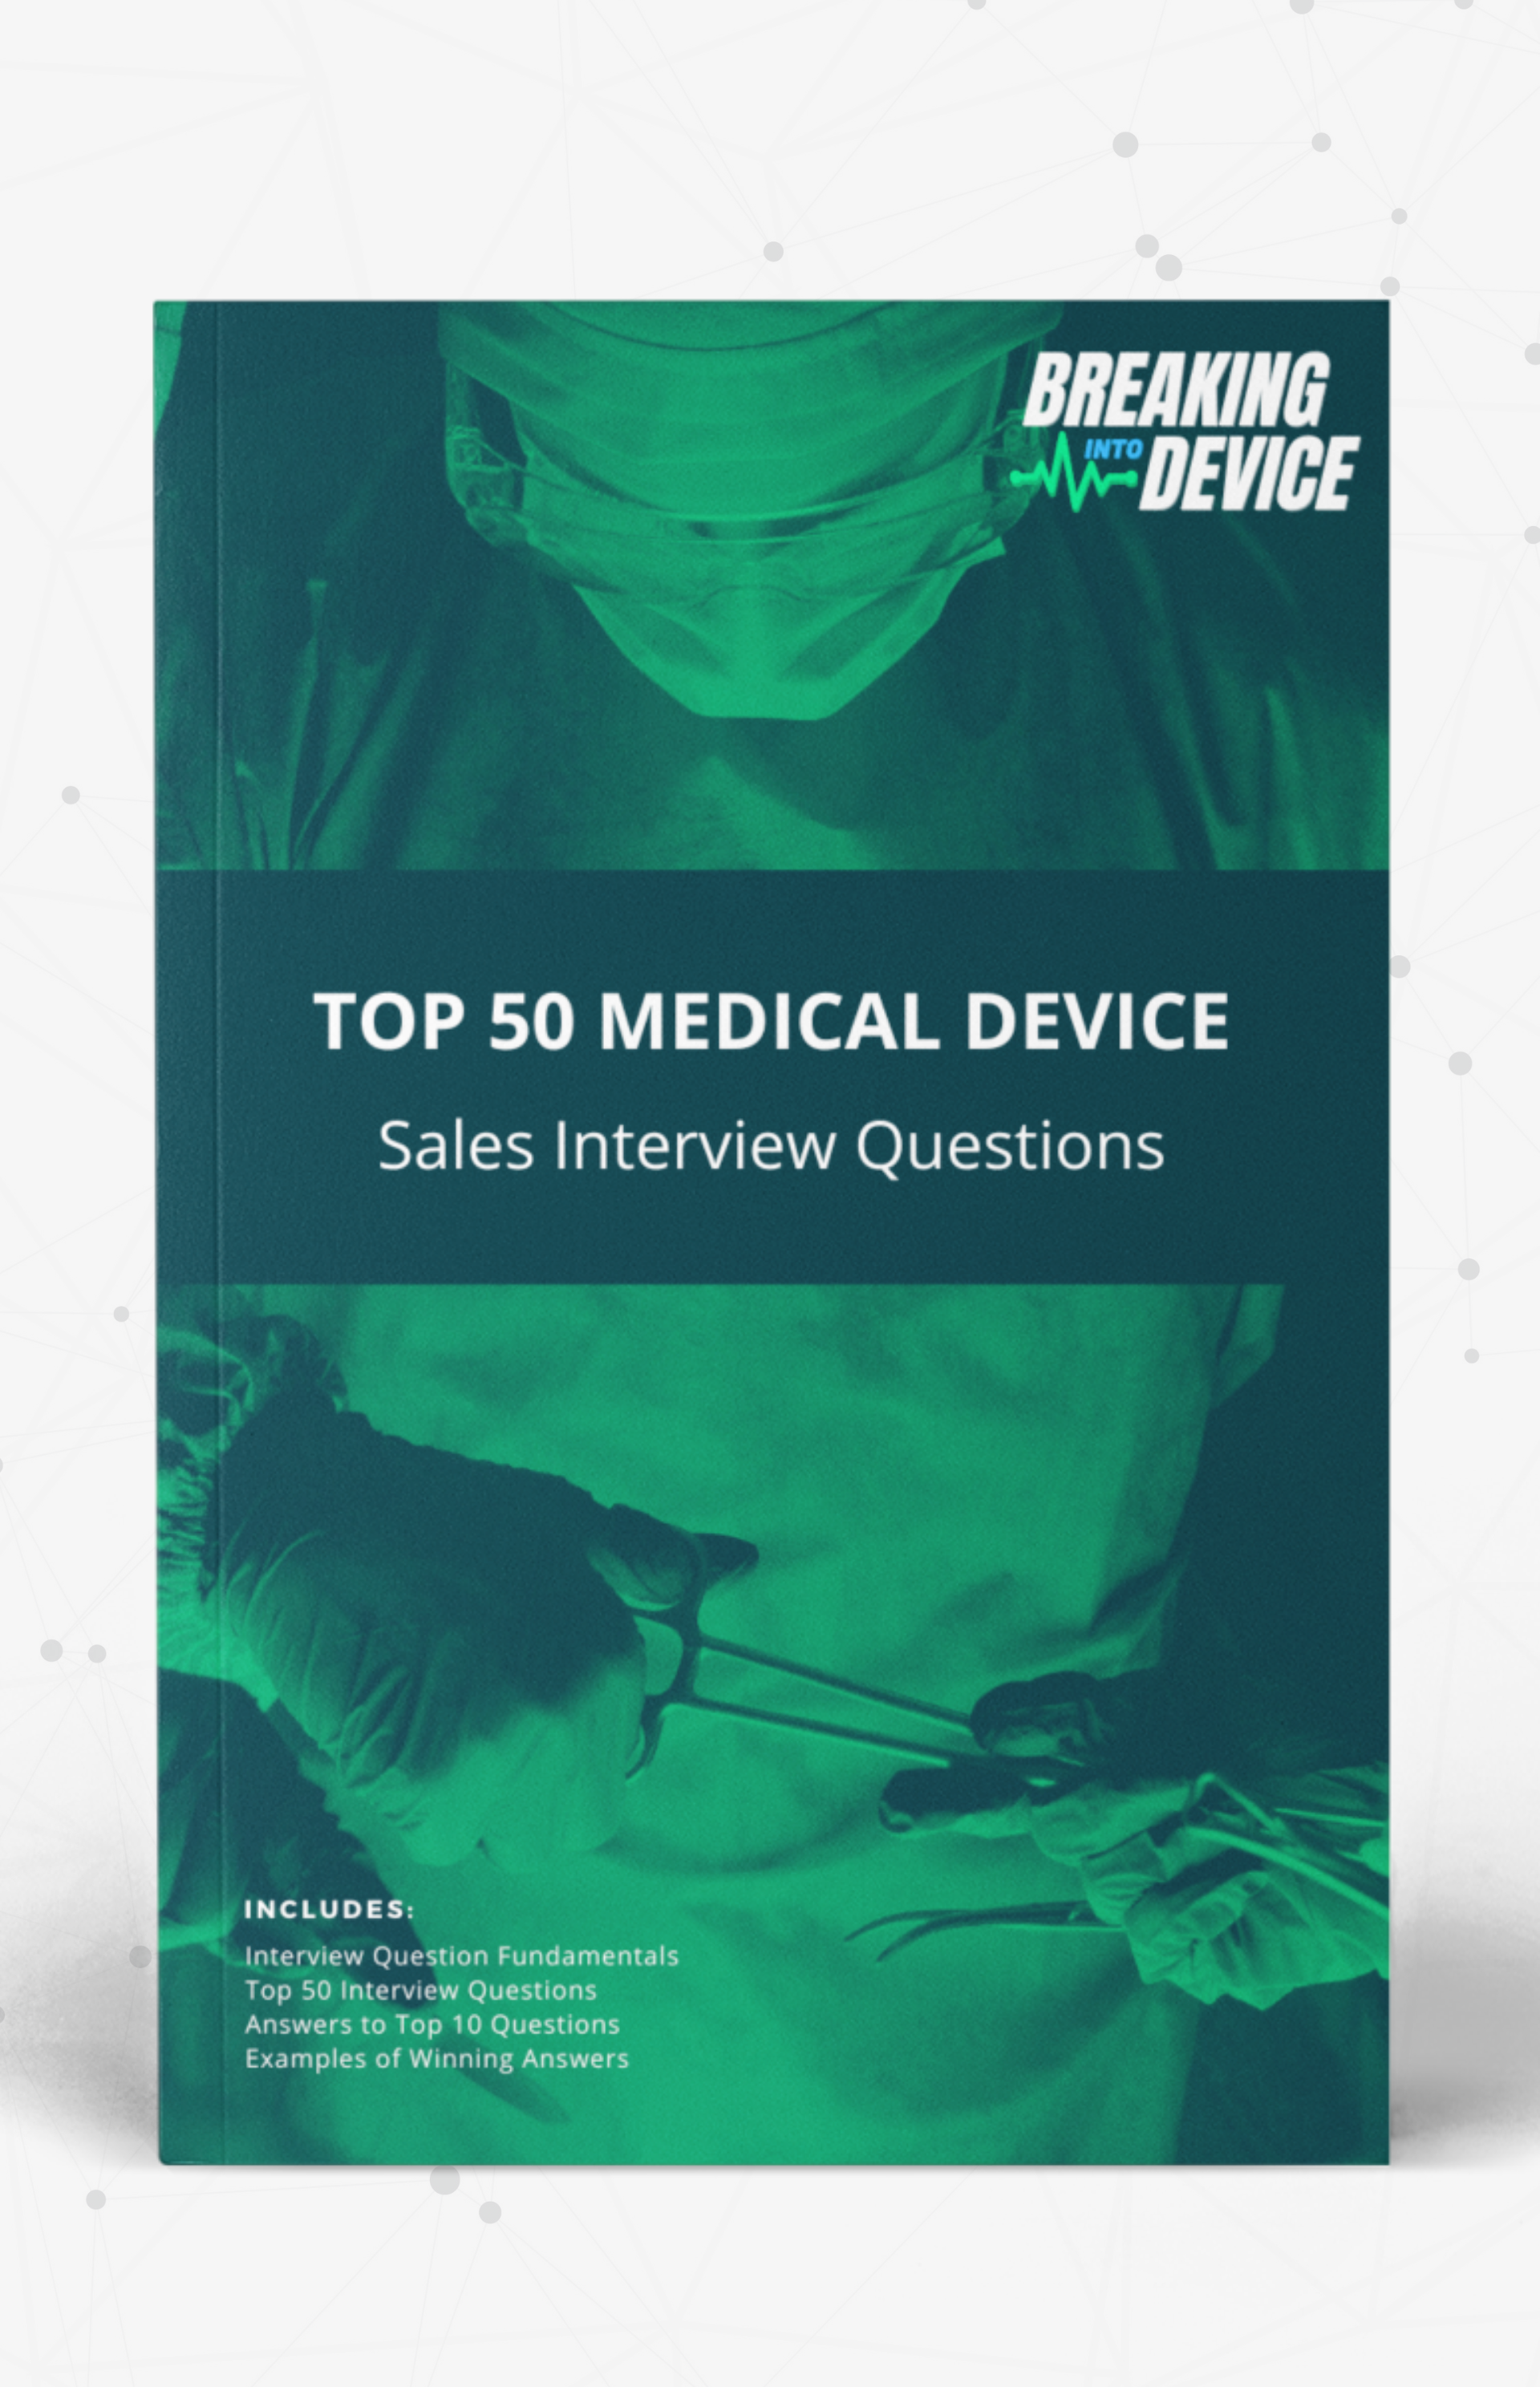 Top 50 Medical Device Sales Interview Questions